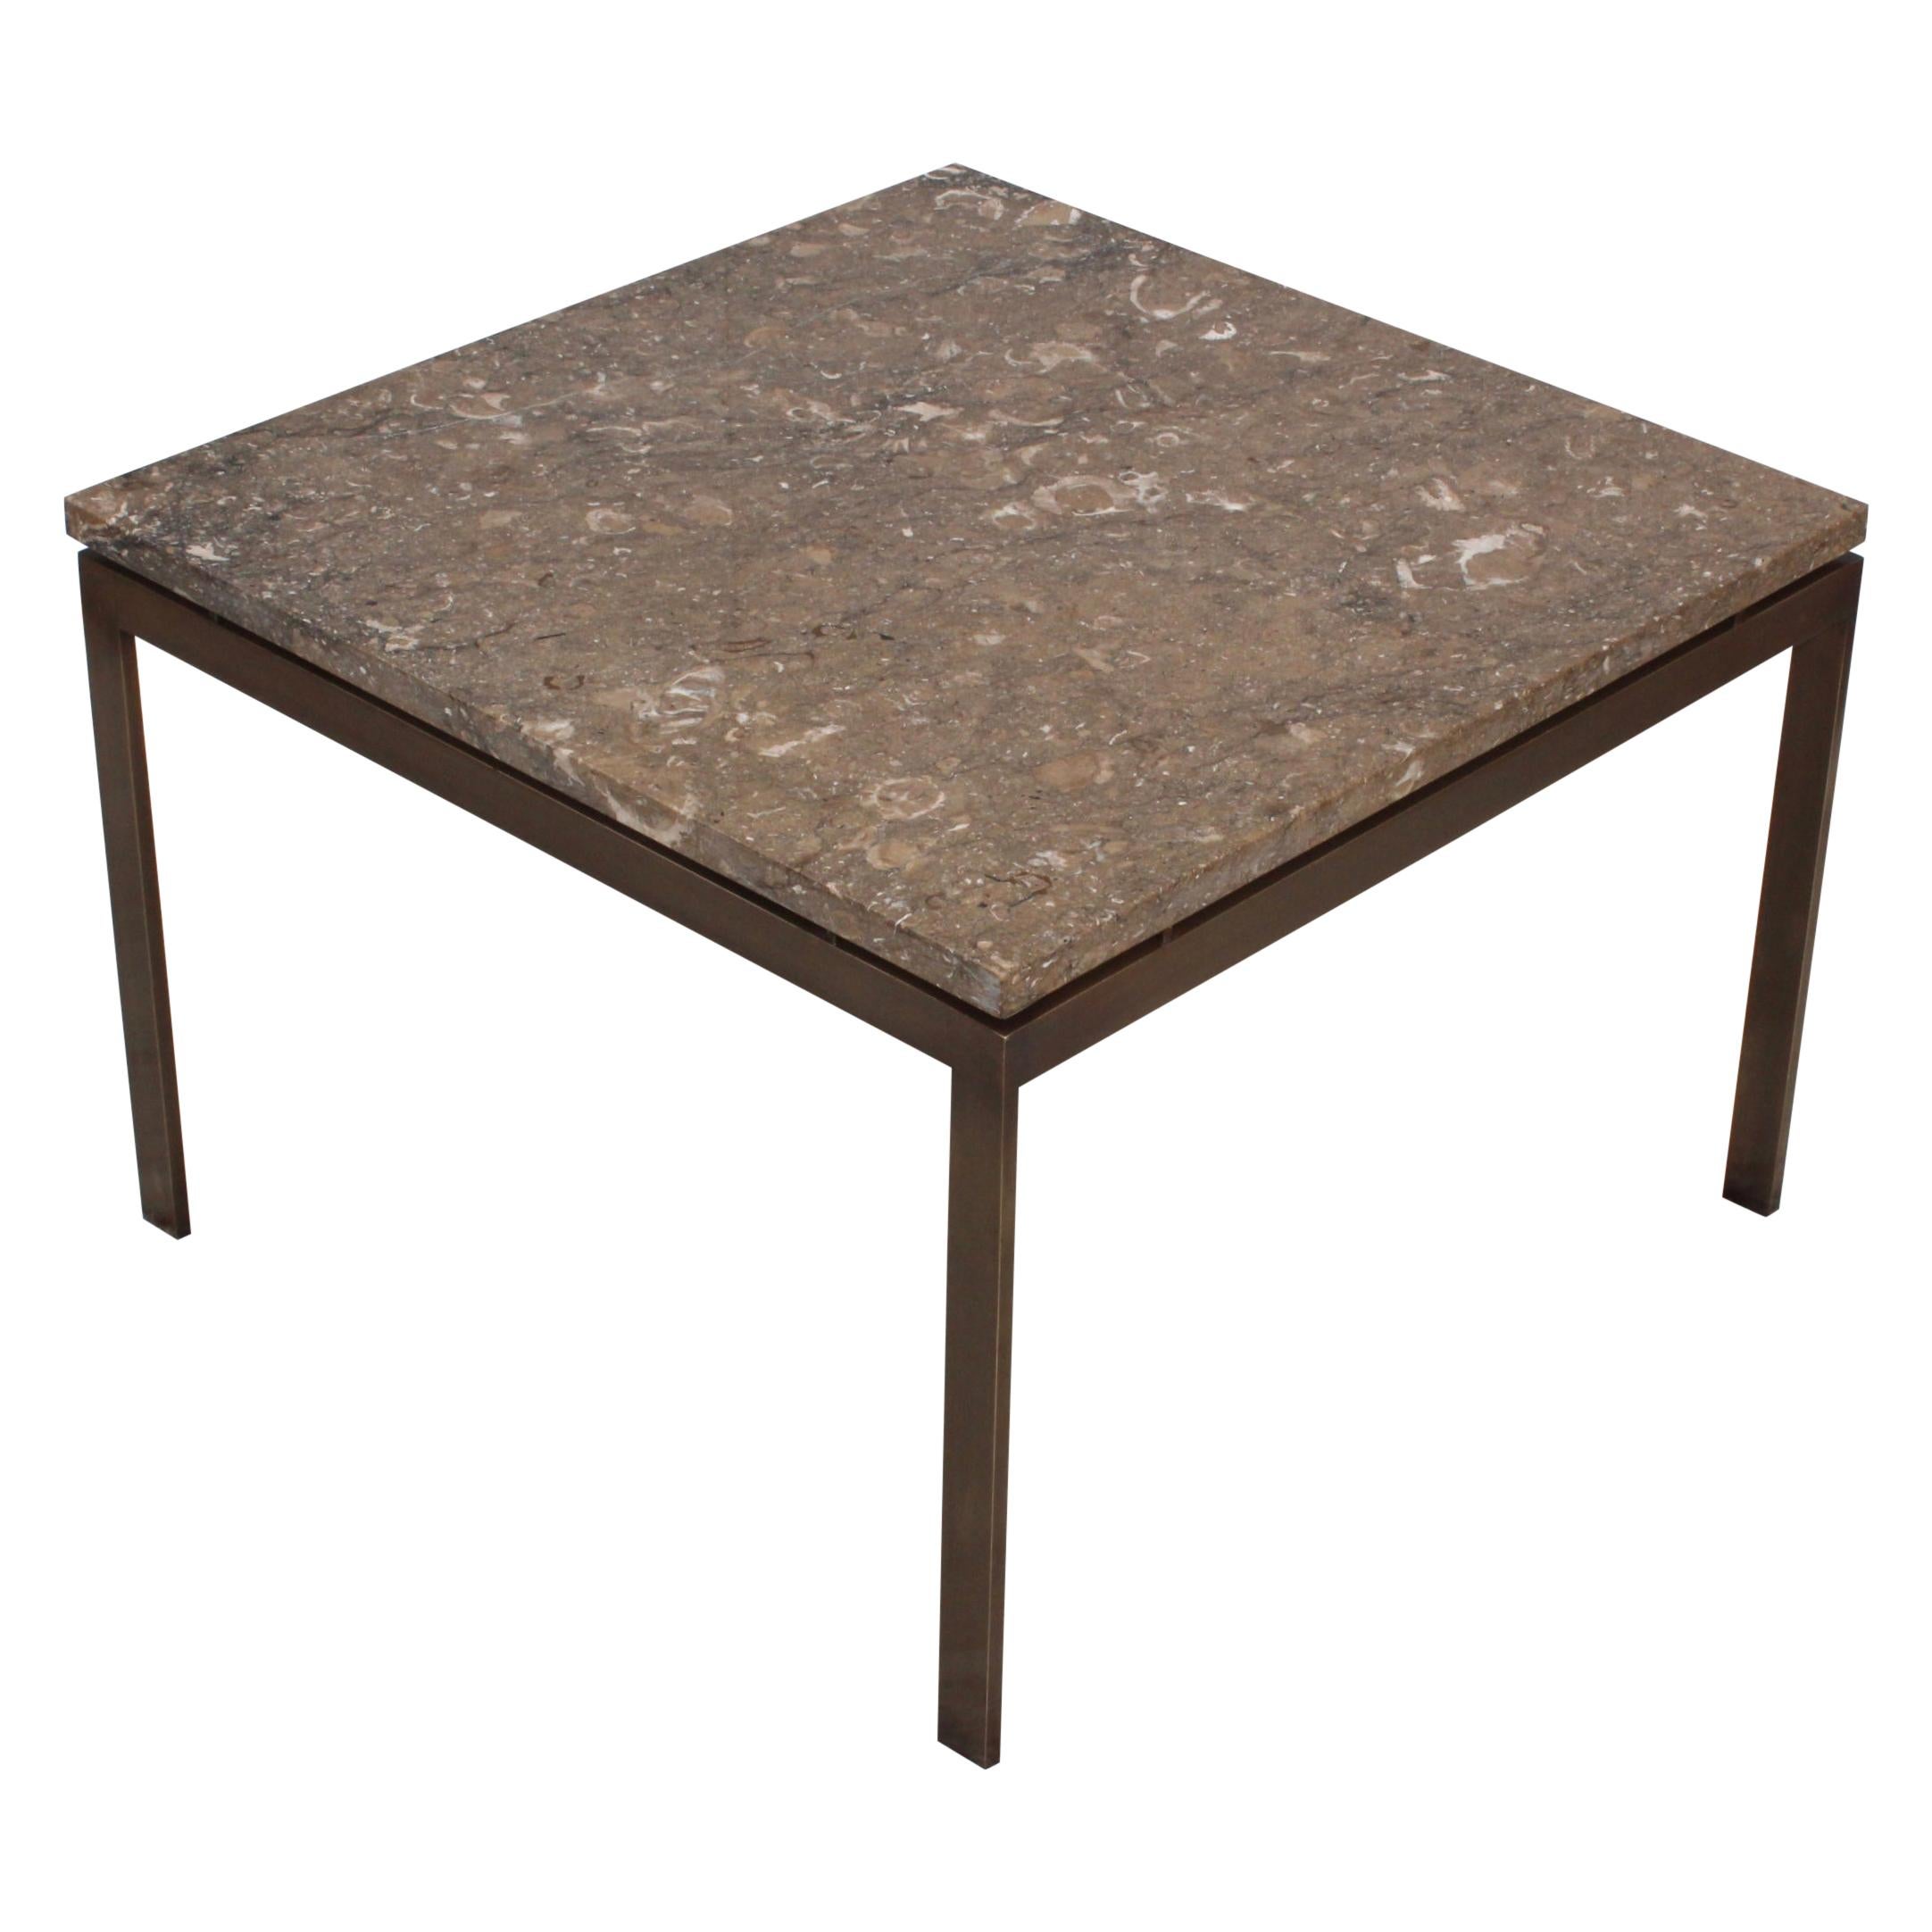 1960's Mid-Century Modern Bronze and Rosa Tica Marble Custom Made Coffee Table For Sale